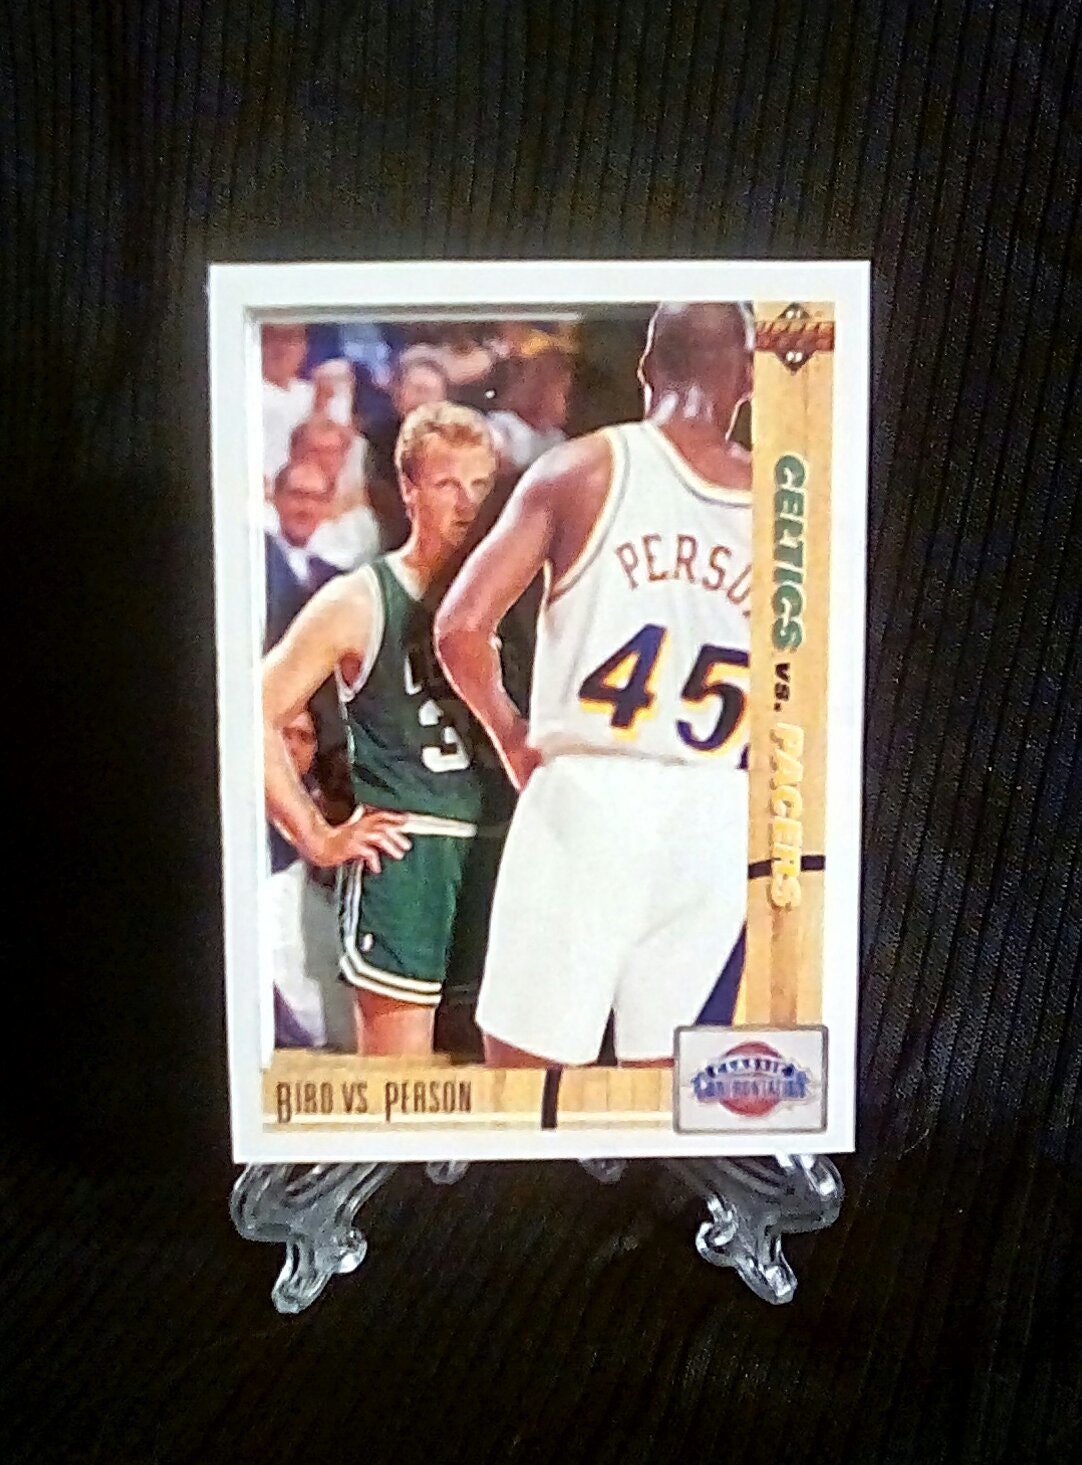 Art Larry Joe Bird Larryjoebird Larry Joe Bird Larry Bird Indianapacers  Indiana Pacers Boston Celtic Poster